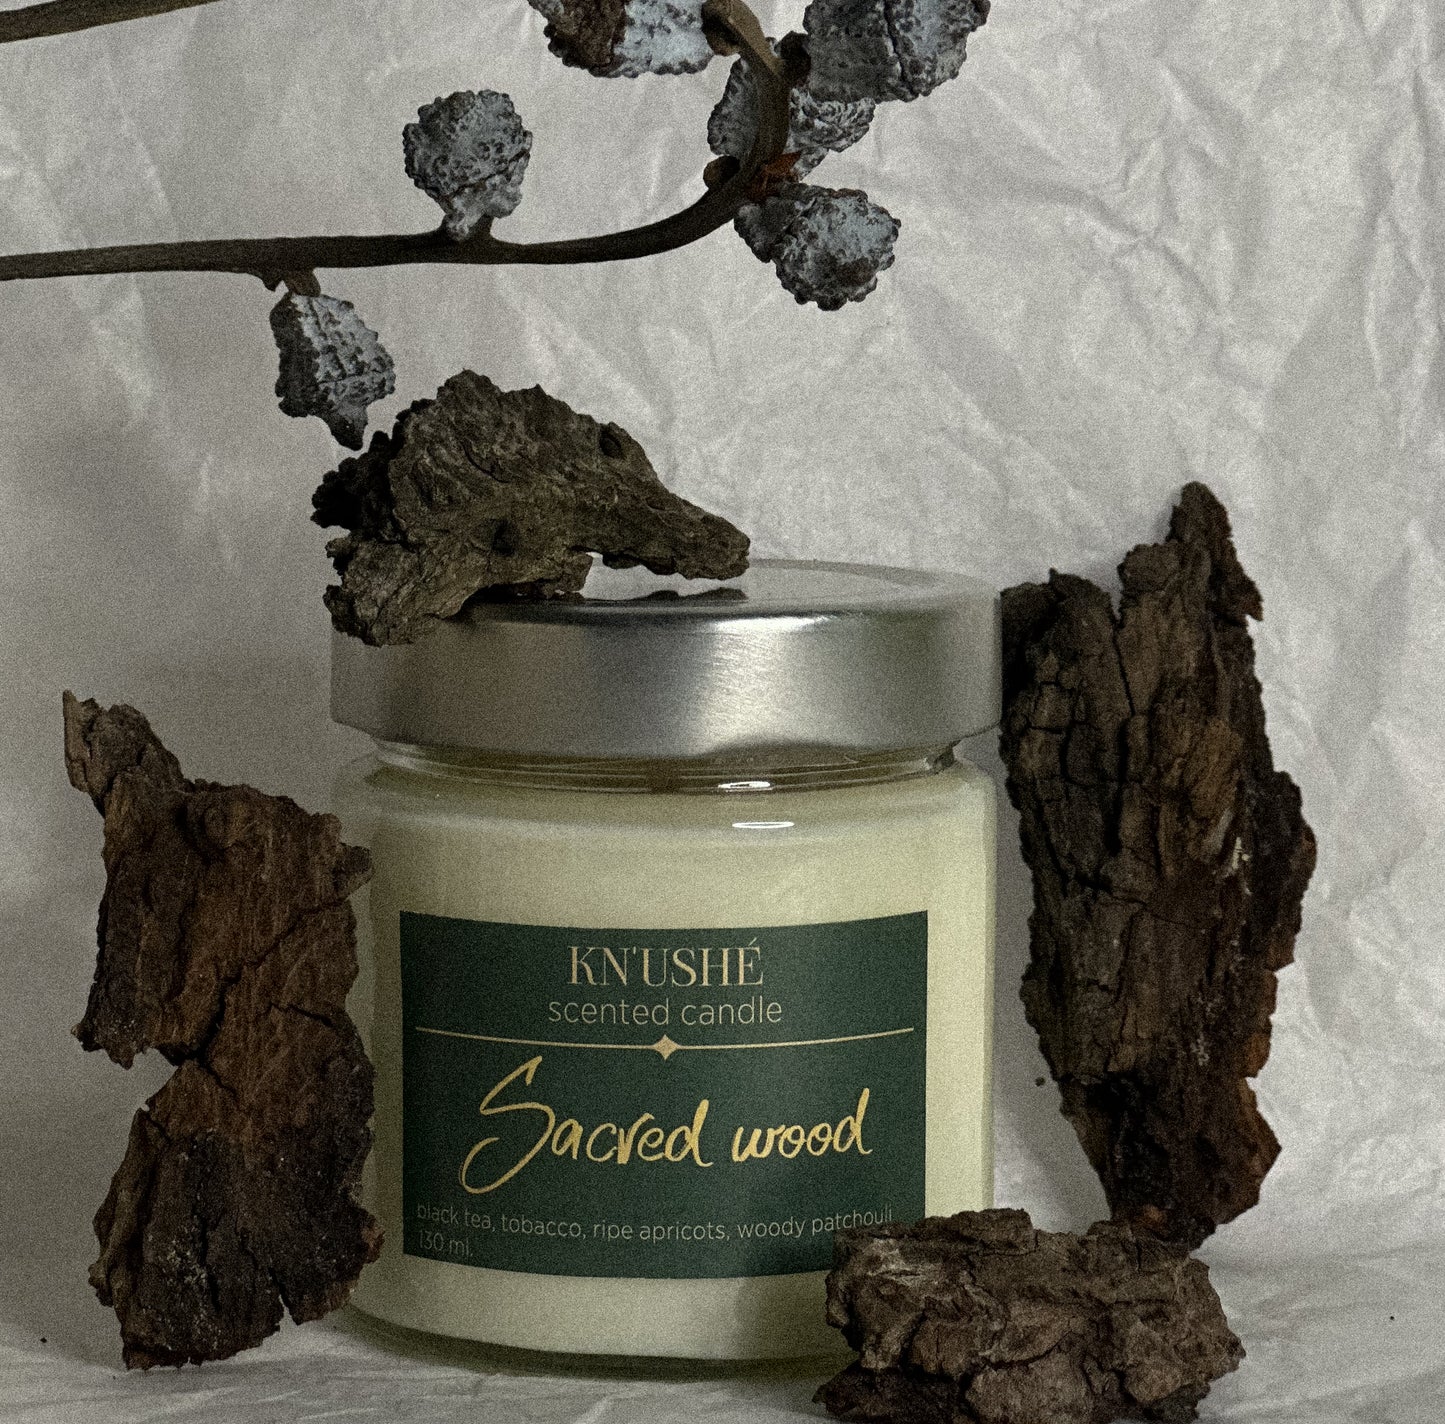 Scented candle made of vegetable soy wax with "Sacred wood" scent